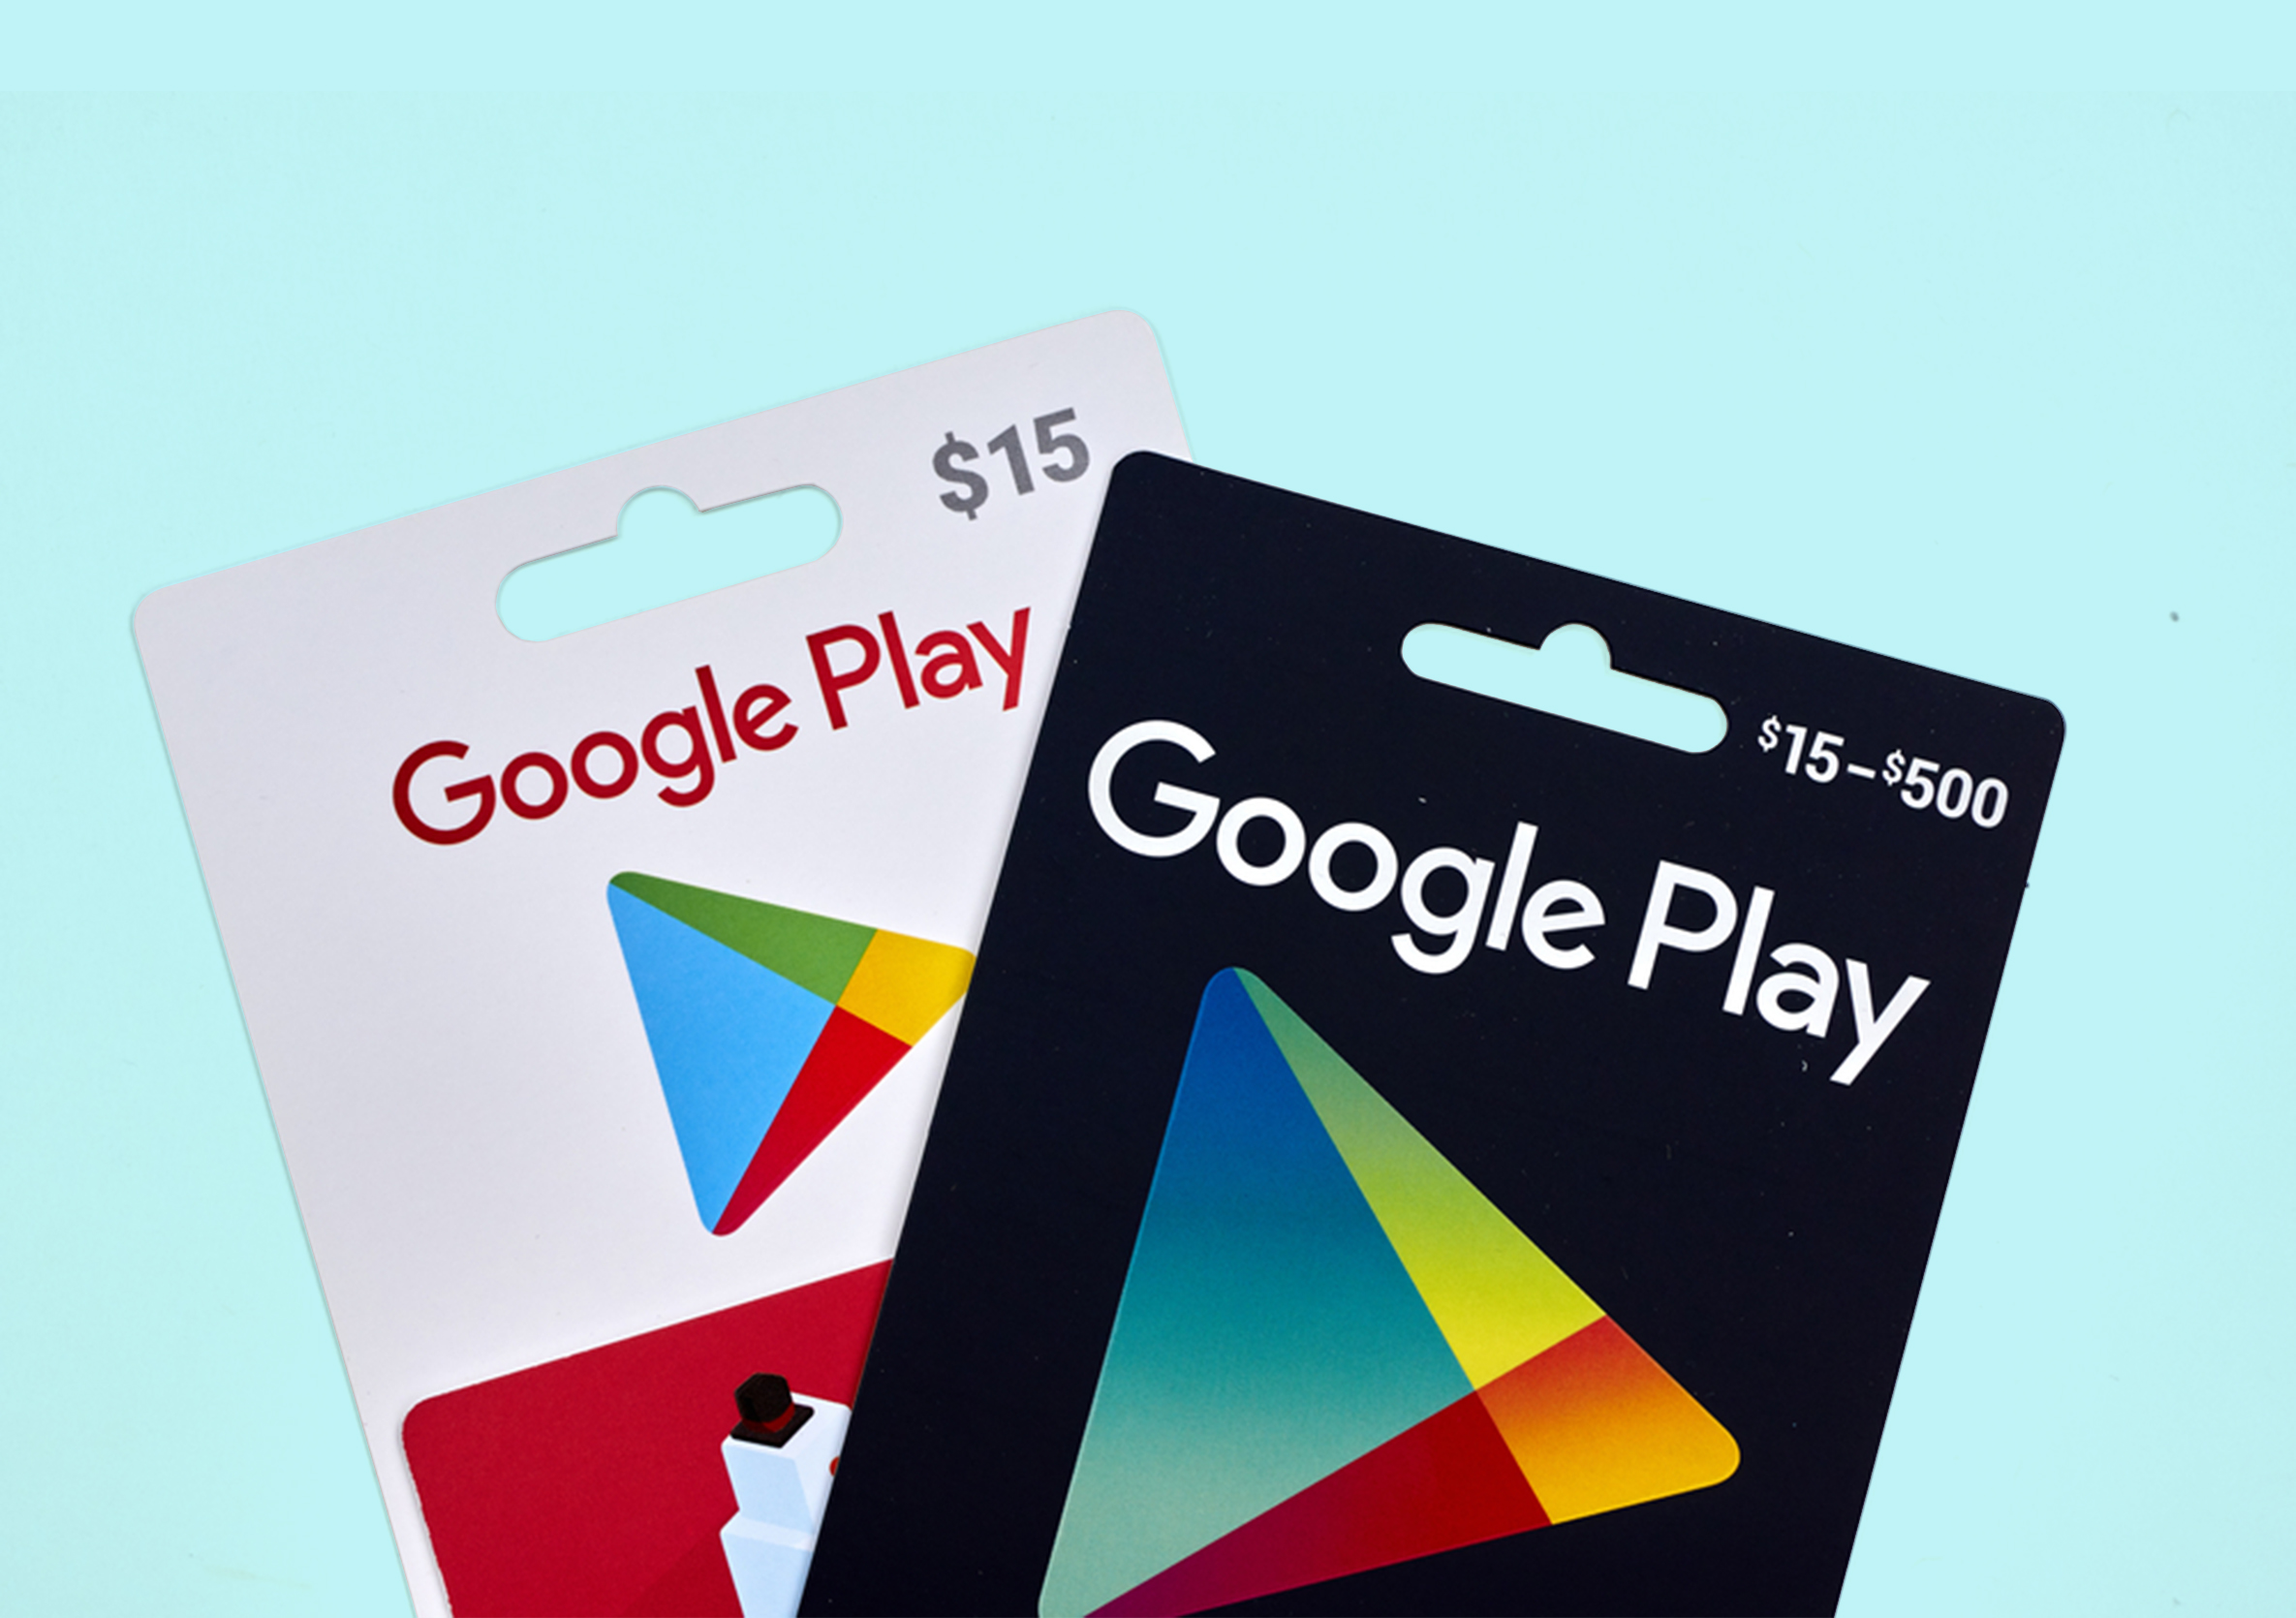 Top 5 Applications To Buy on Google Play Store - Cardtonic